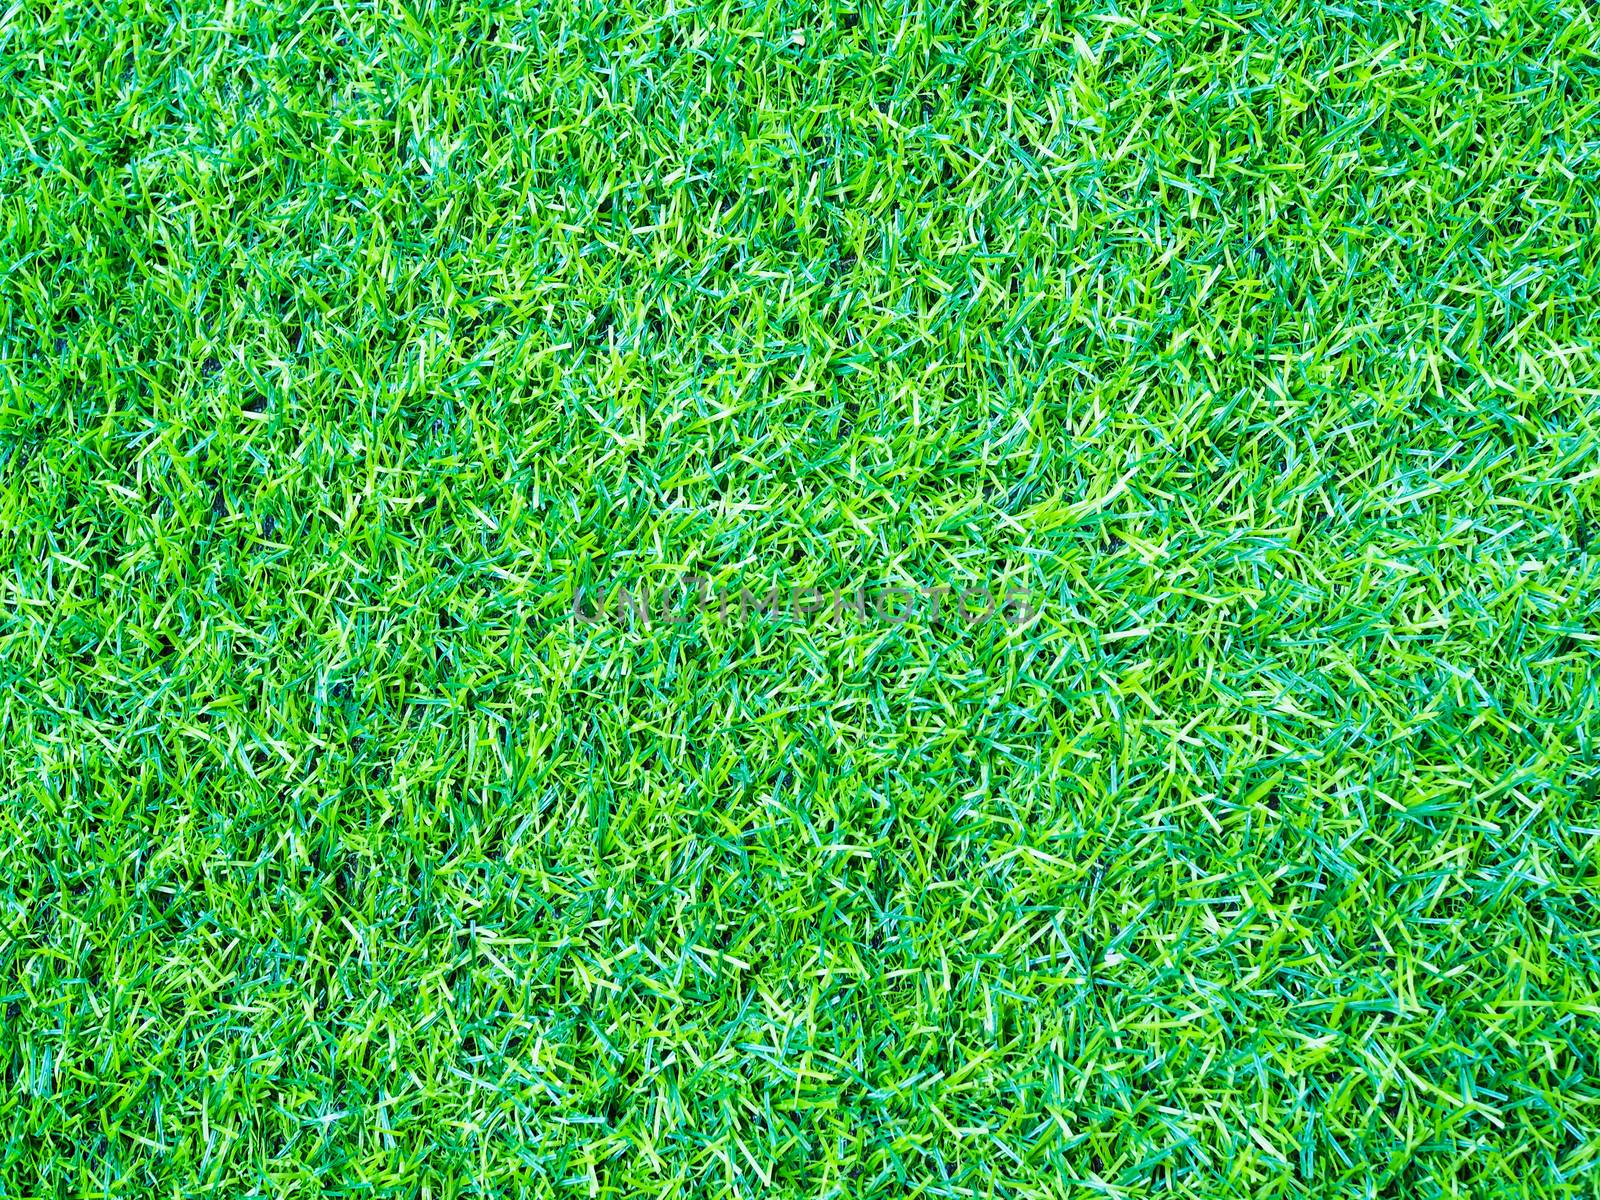 Banner with green lawn grass background with copy space by kittima05